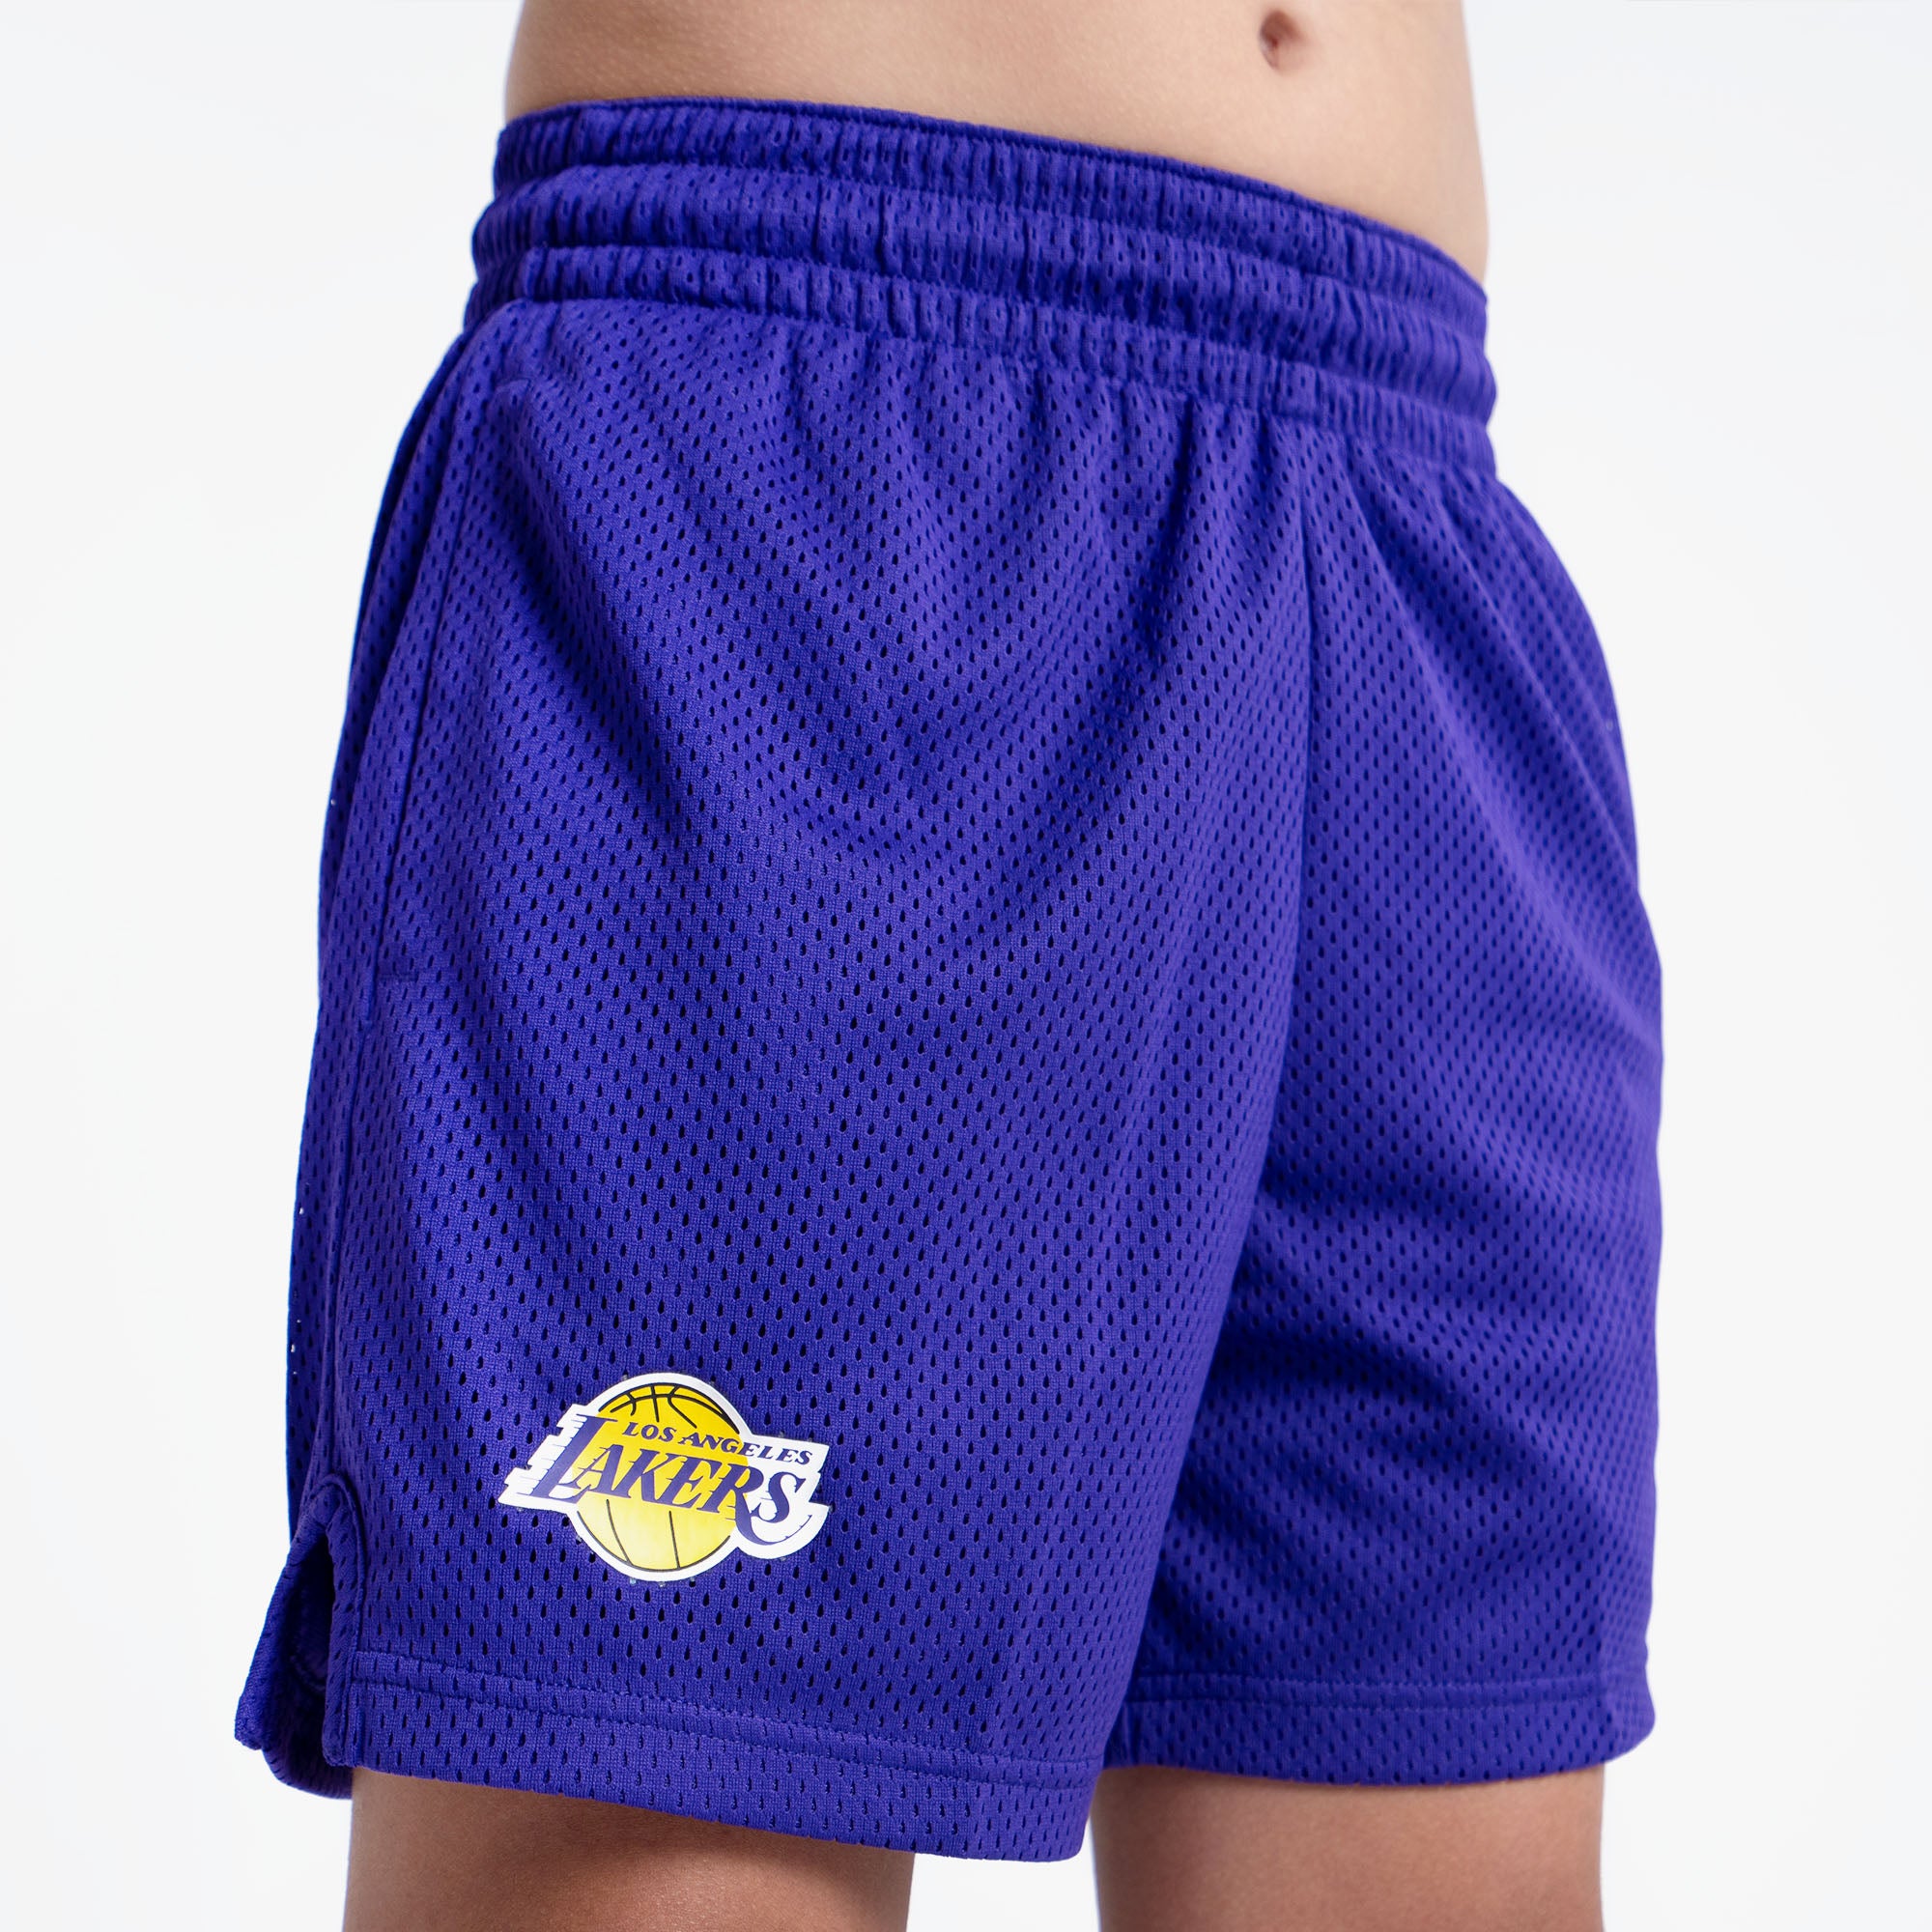 New Arrival Jersey Short Lakers Full Embroidery High quality